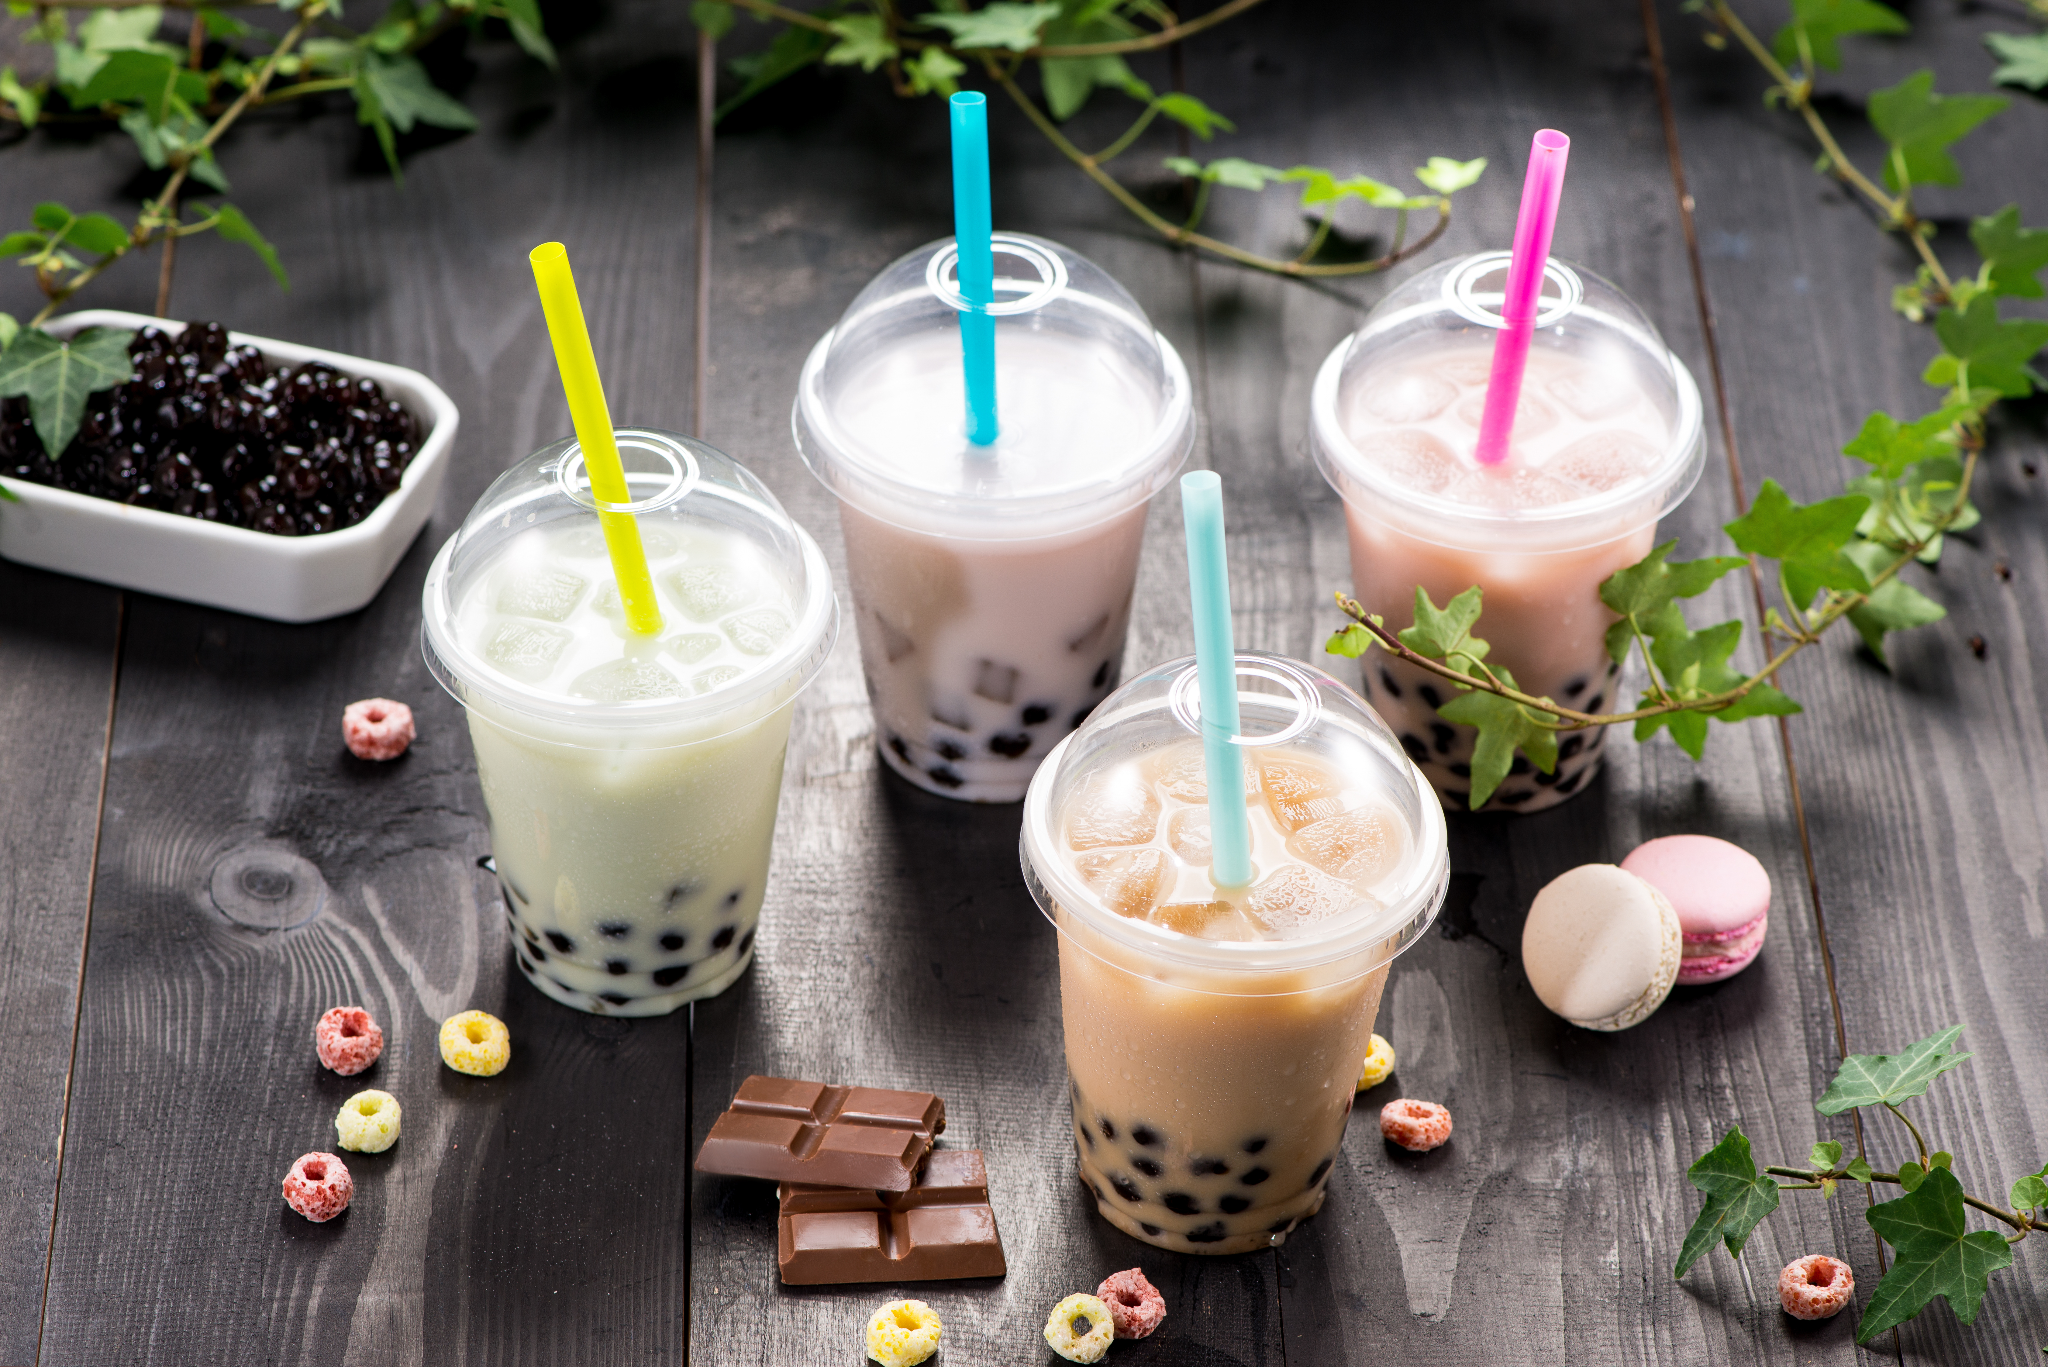 https://takeawaypackaging.co.uk/wp-content/uploads/2020/05/What-Are-the-Bubbles-in-Bubble-Tea.png